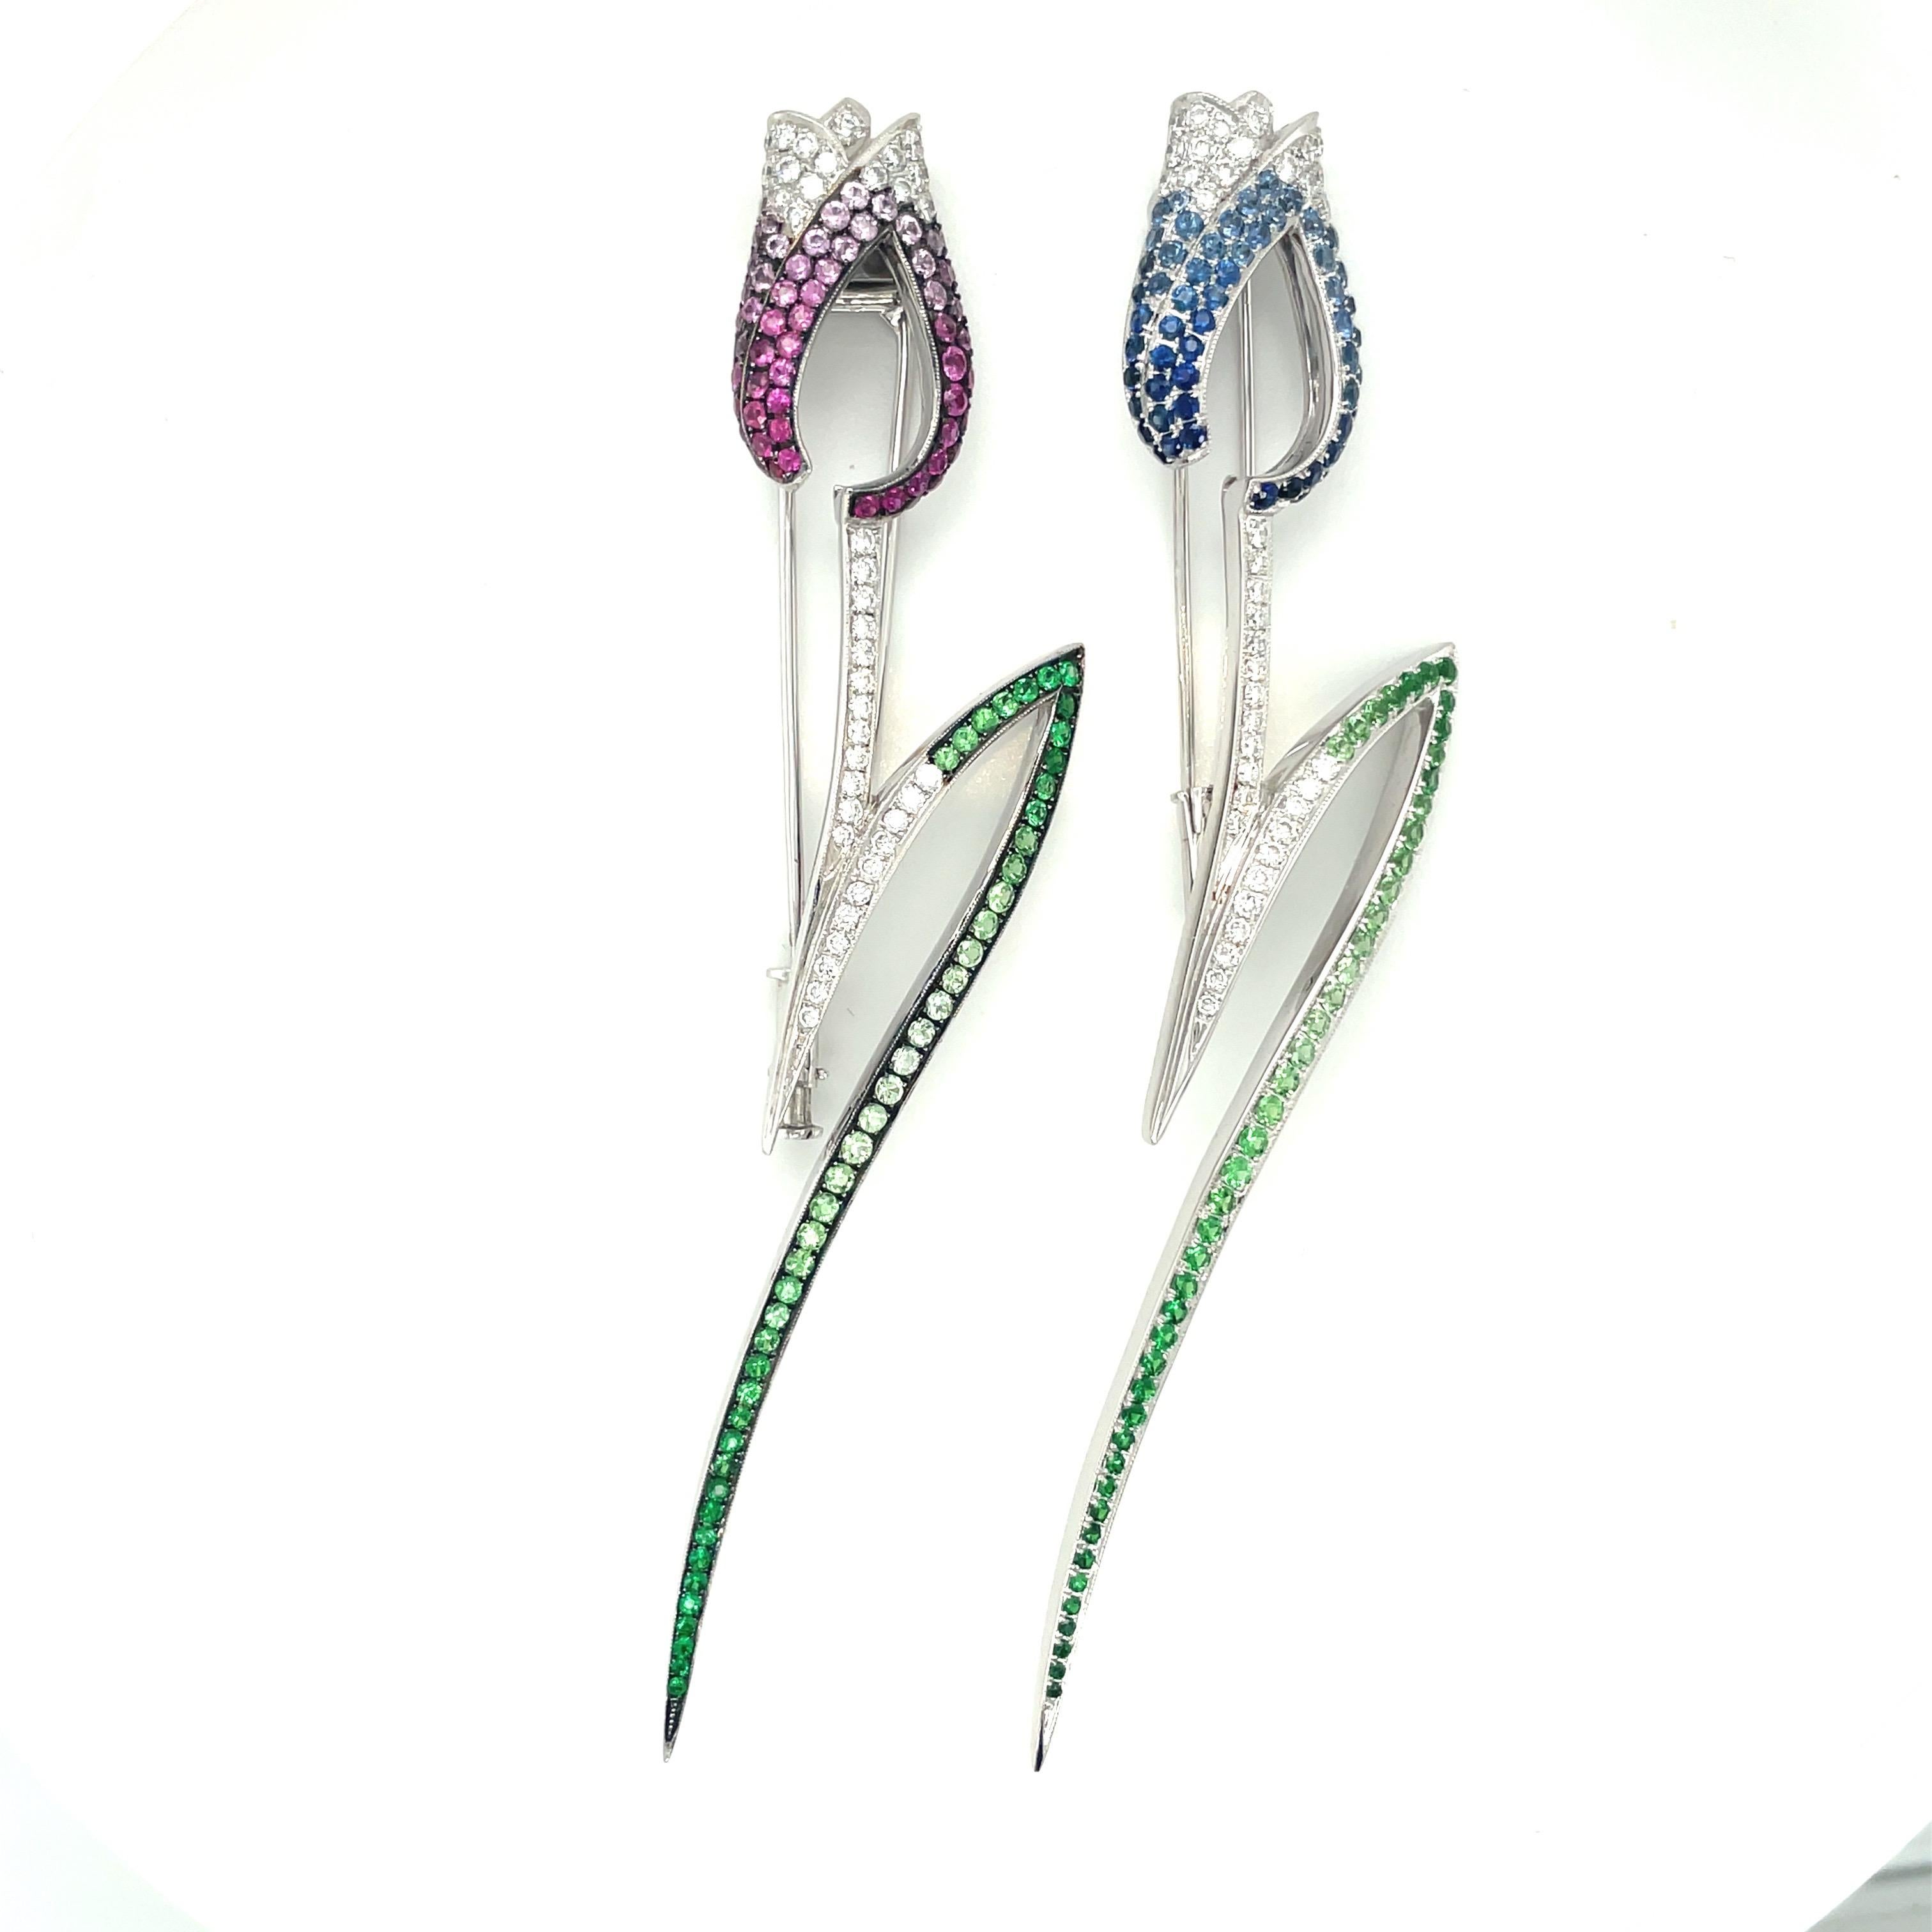 A beautifully designed 18 karat white gold tulip brooch. The flower is set with with shades of dark, transitioning to light blue sapphires . Shades of green tsavorites are set as the leaf, with round brilliant diamonds accenting  this graceful tulip